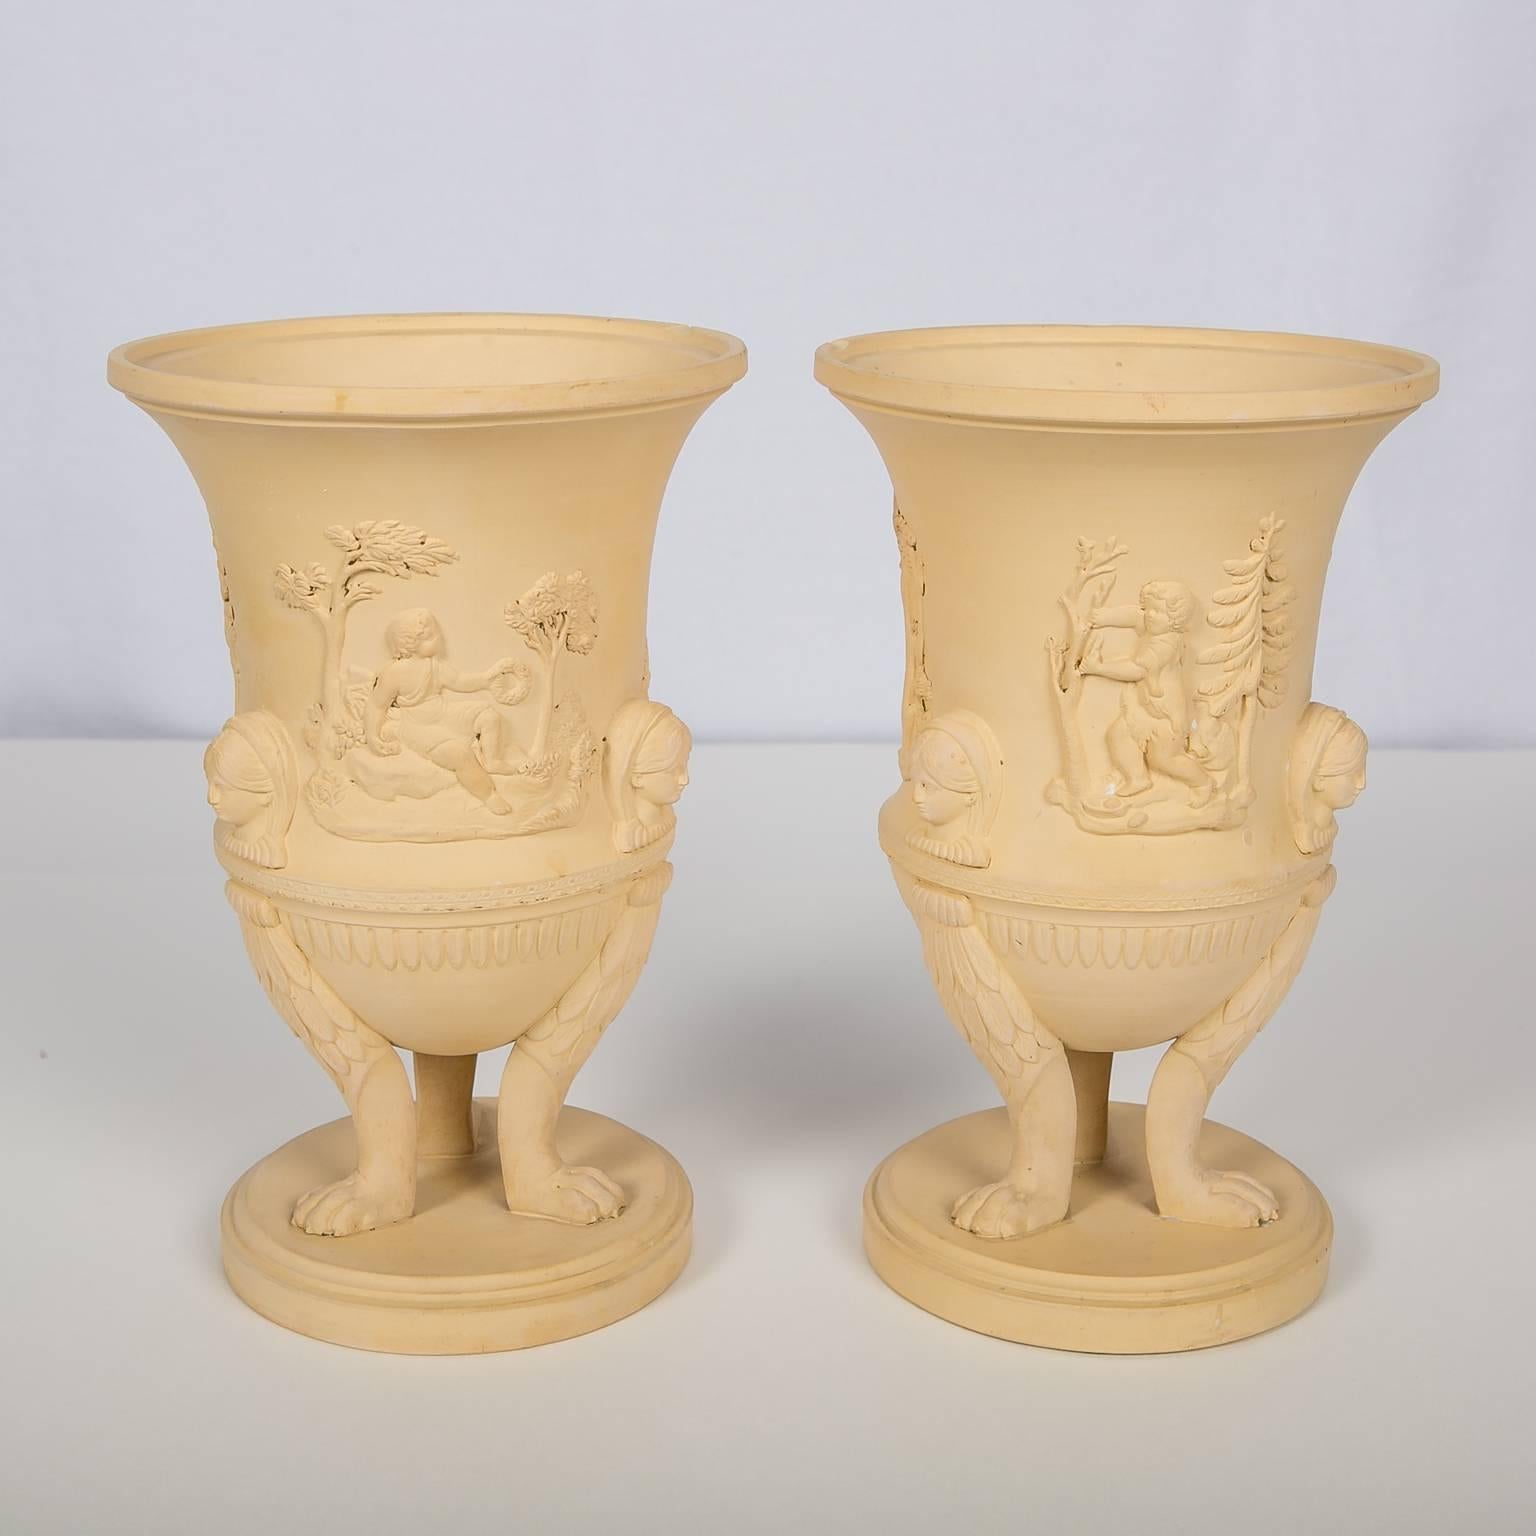 Pair of Neoclassical Vases the Color of Cane Sugar Made circa 1780-1800 6